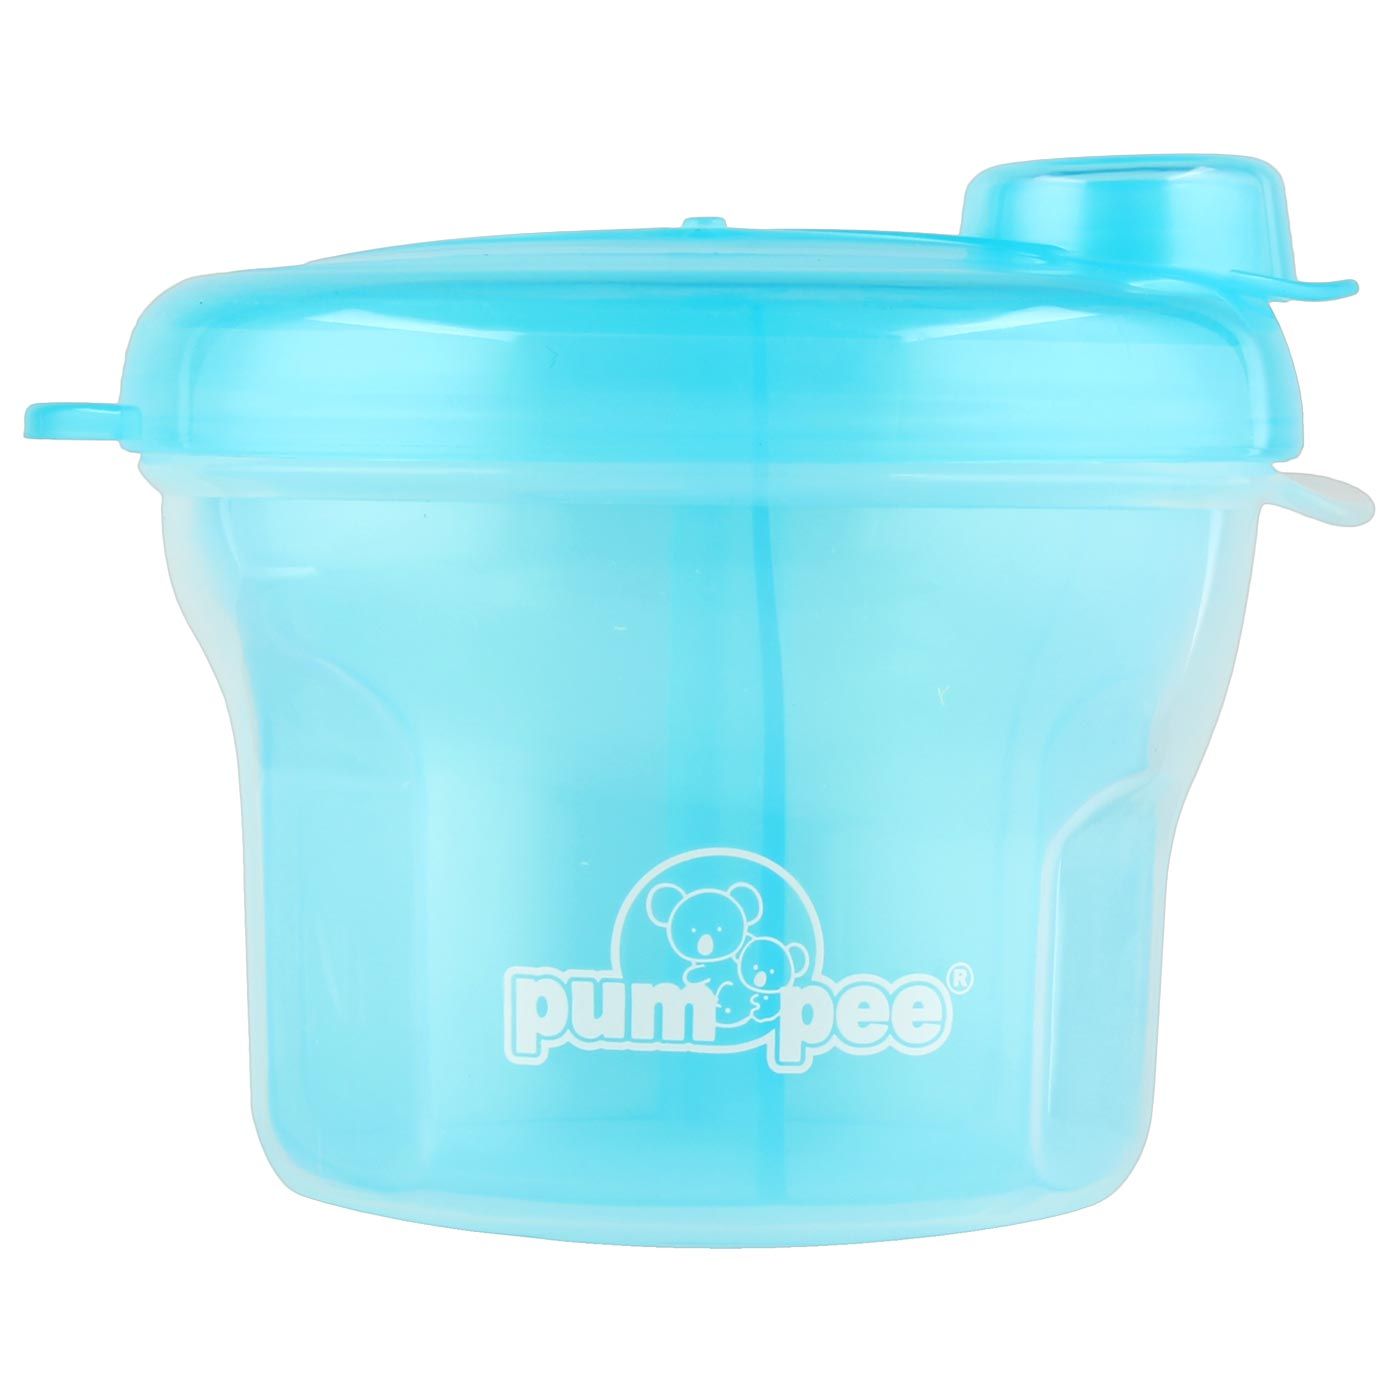 Pumpee Jumbo 3 Section Milk Container | PA-109MPB - 2